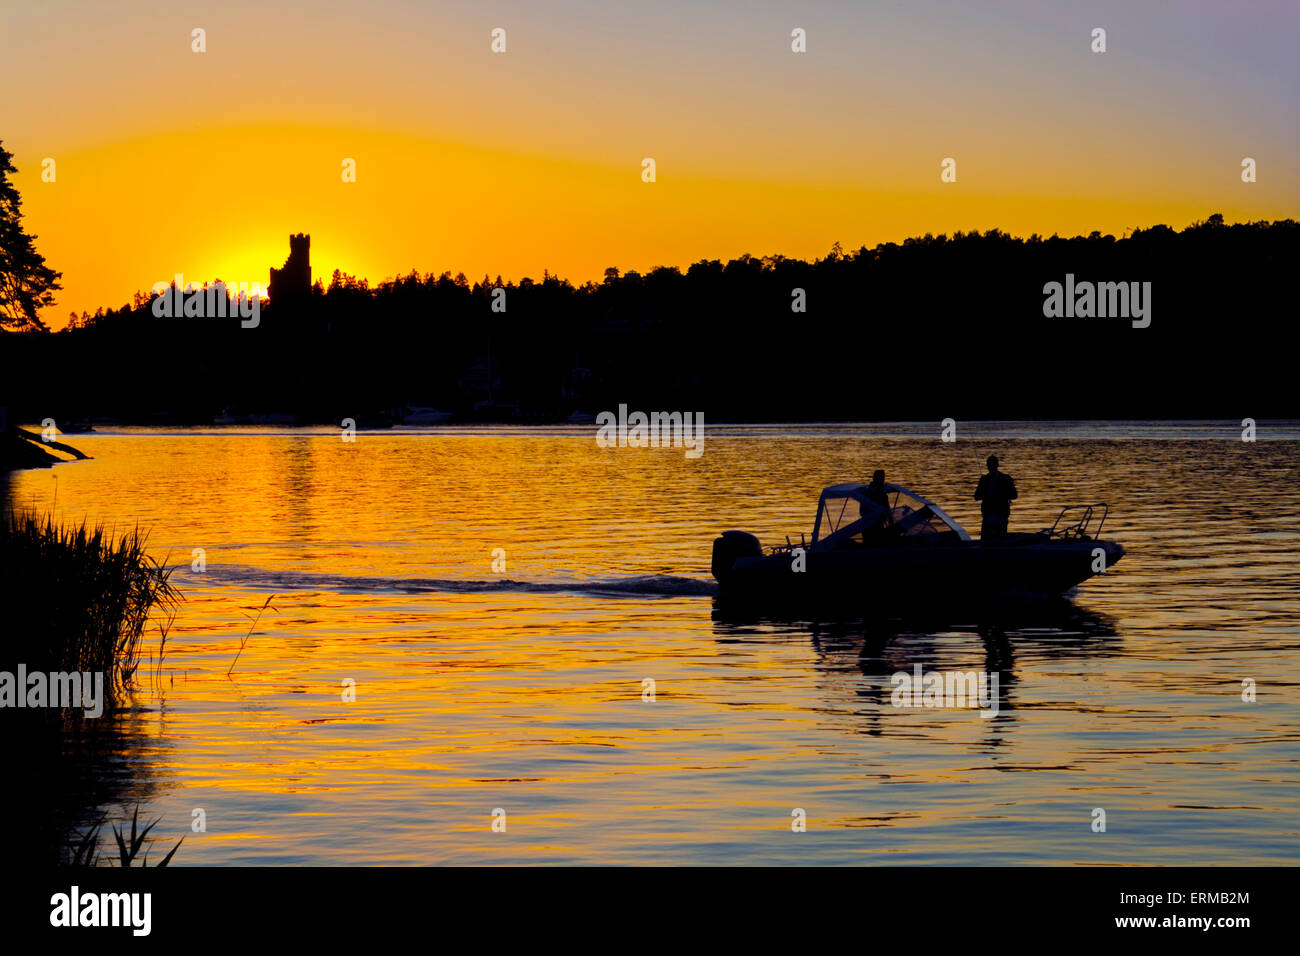 Fishing at Sunset in northern Stockholm, Sweden - No Sales on Alamy or anywhere else Stock Photo